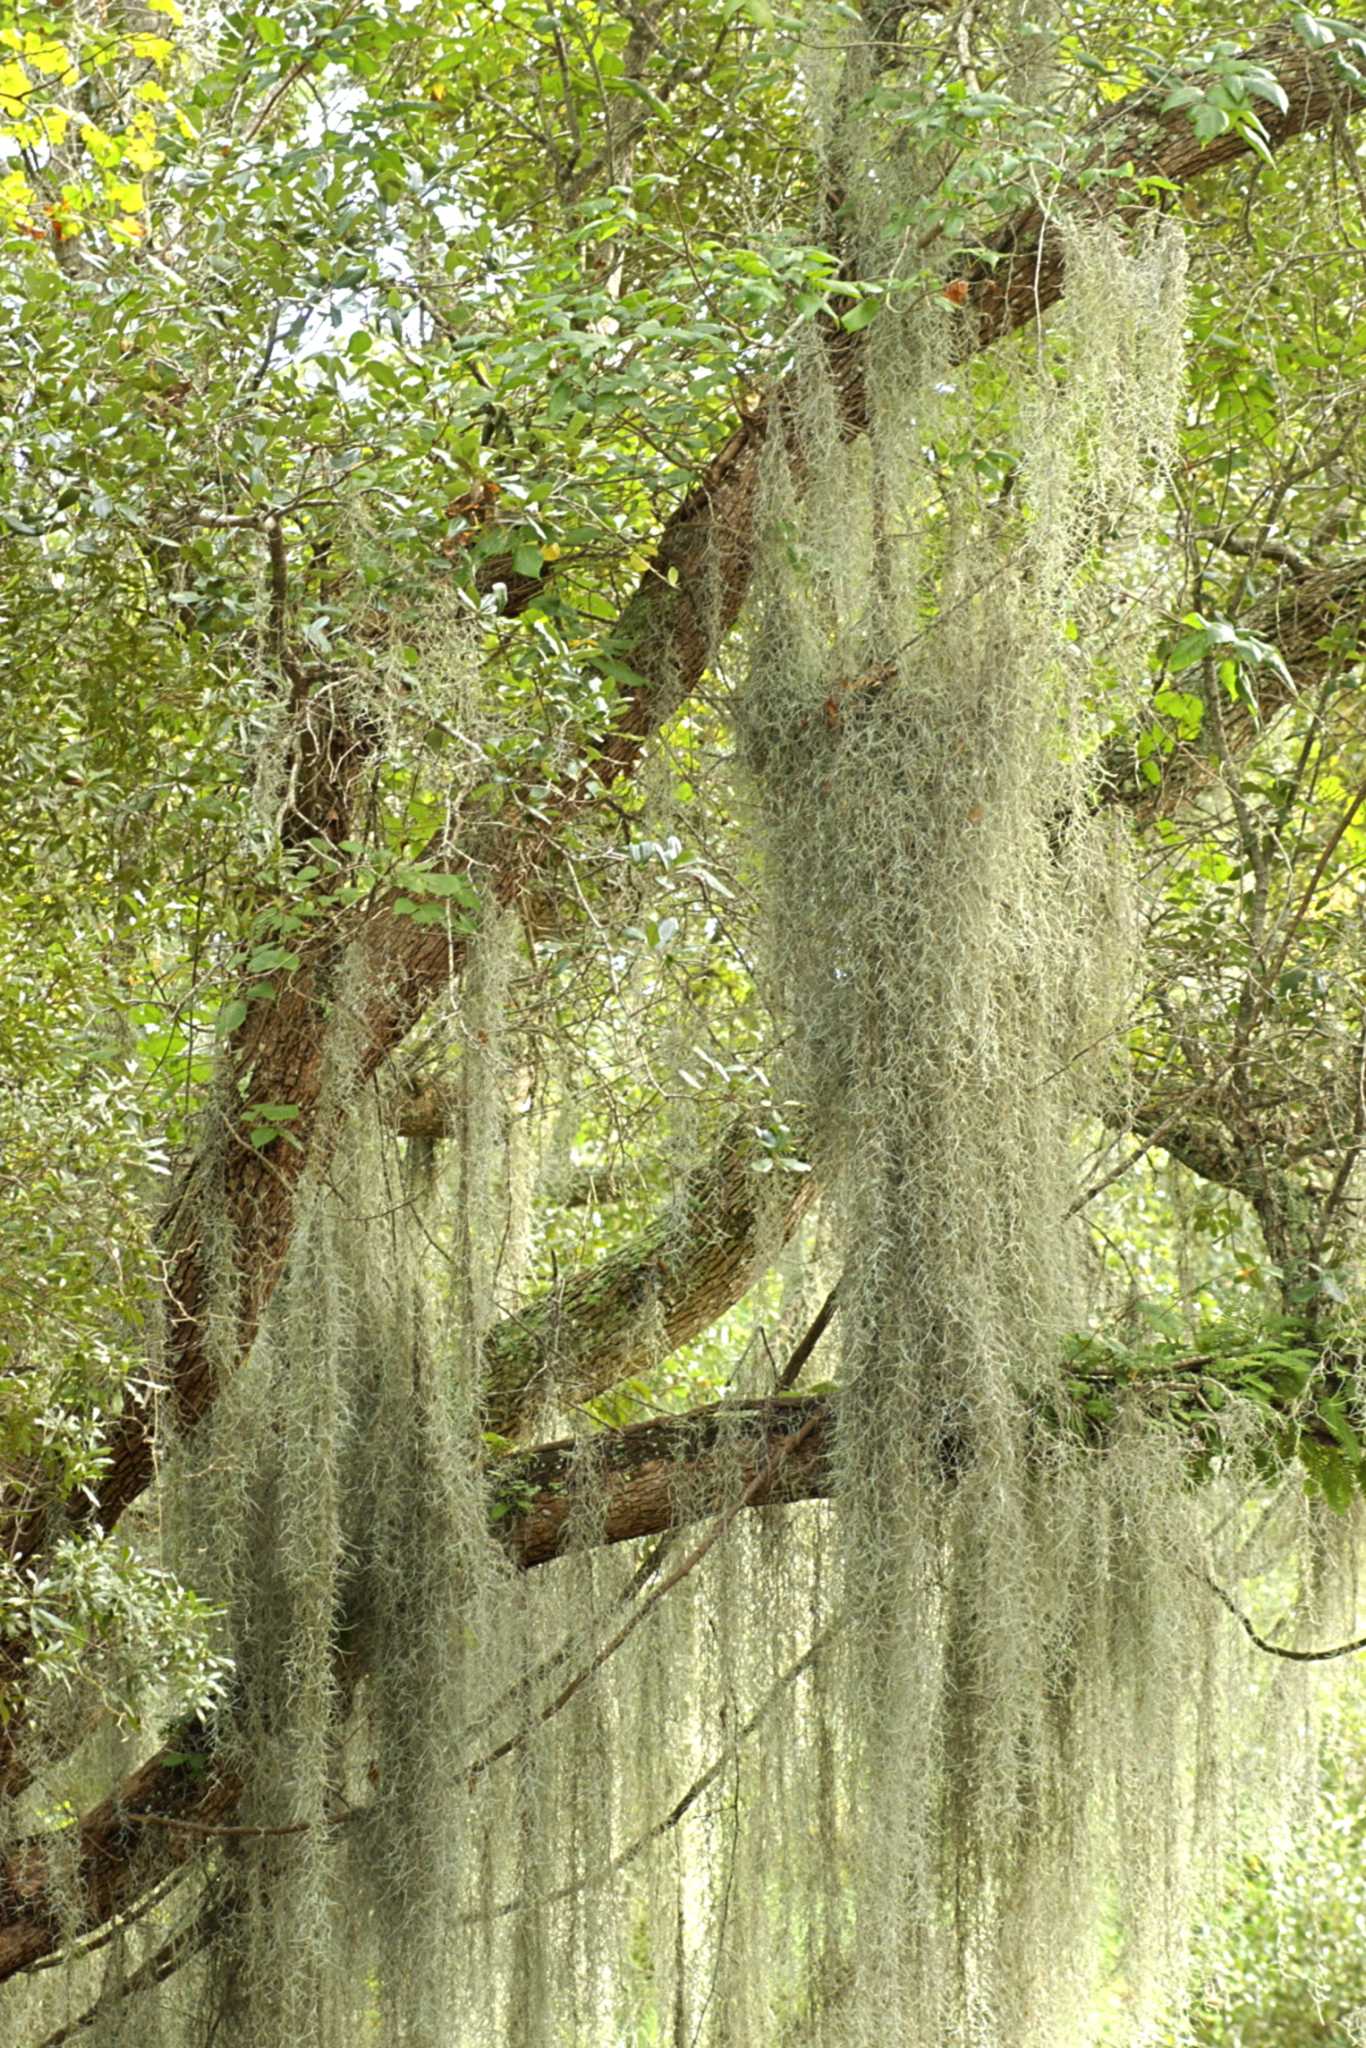 How to Prepare Spanish Moss for Indoor Use